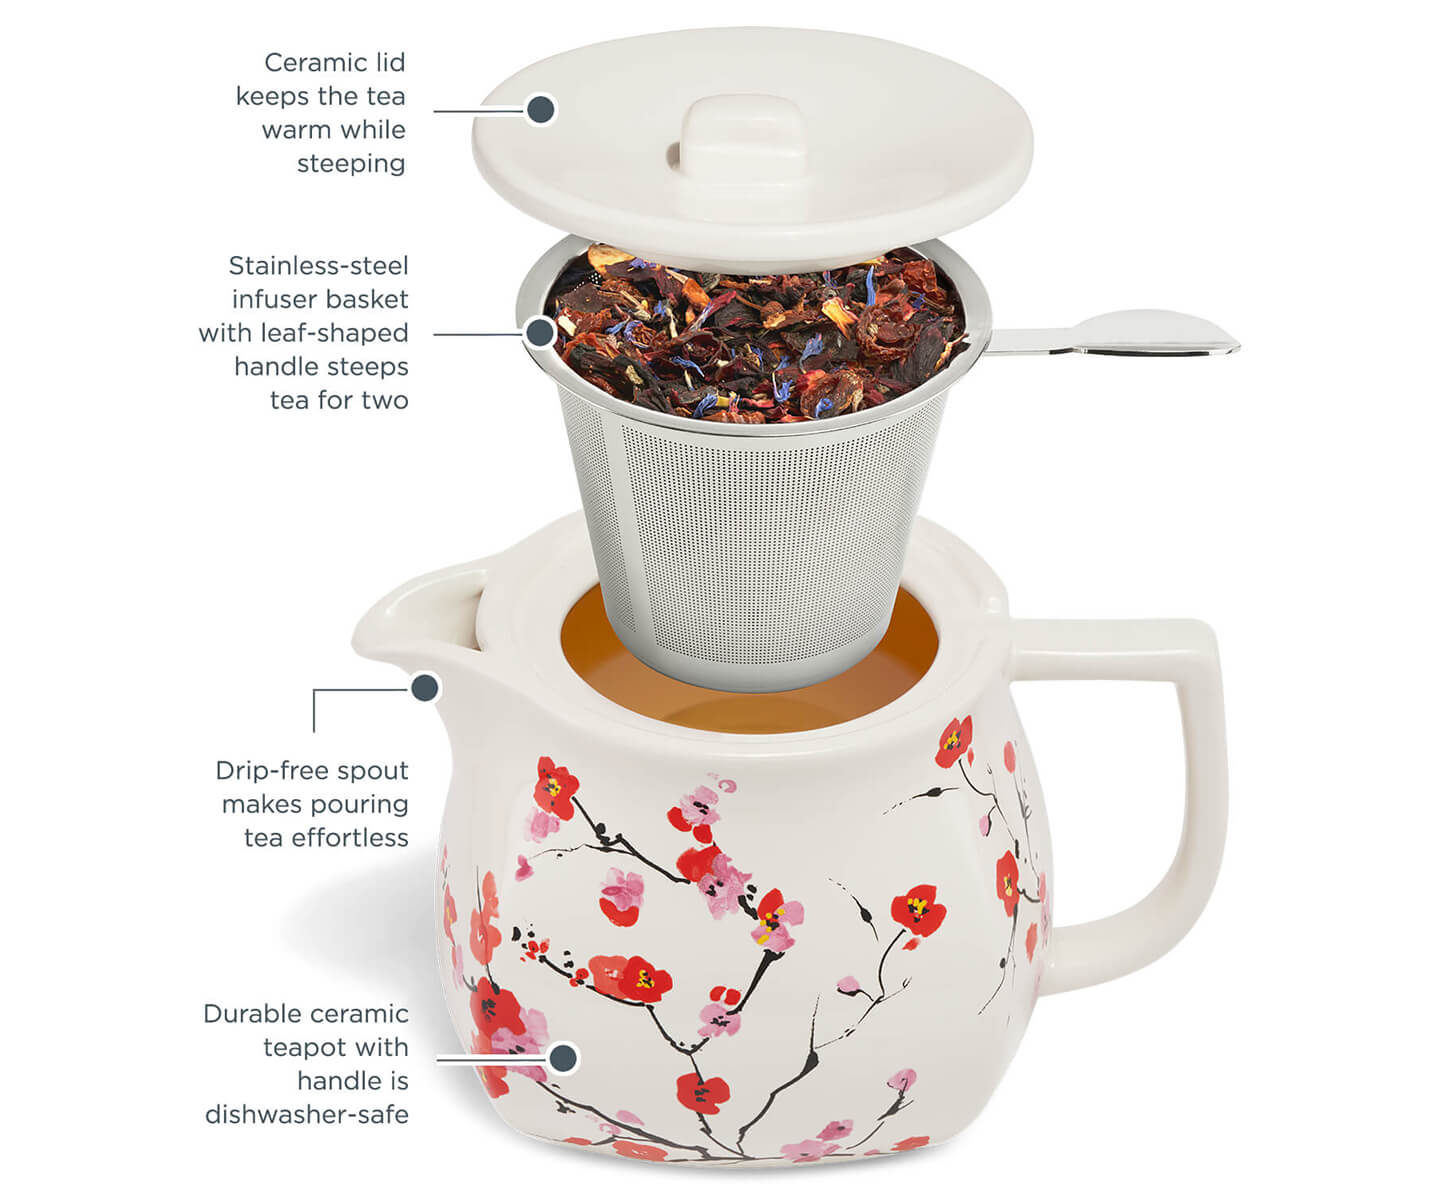 How to steep loose tea with a Fiore Teapot